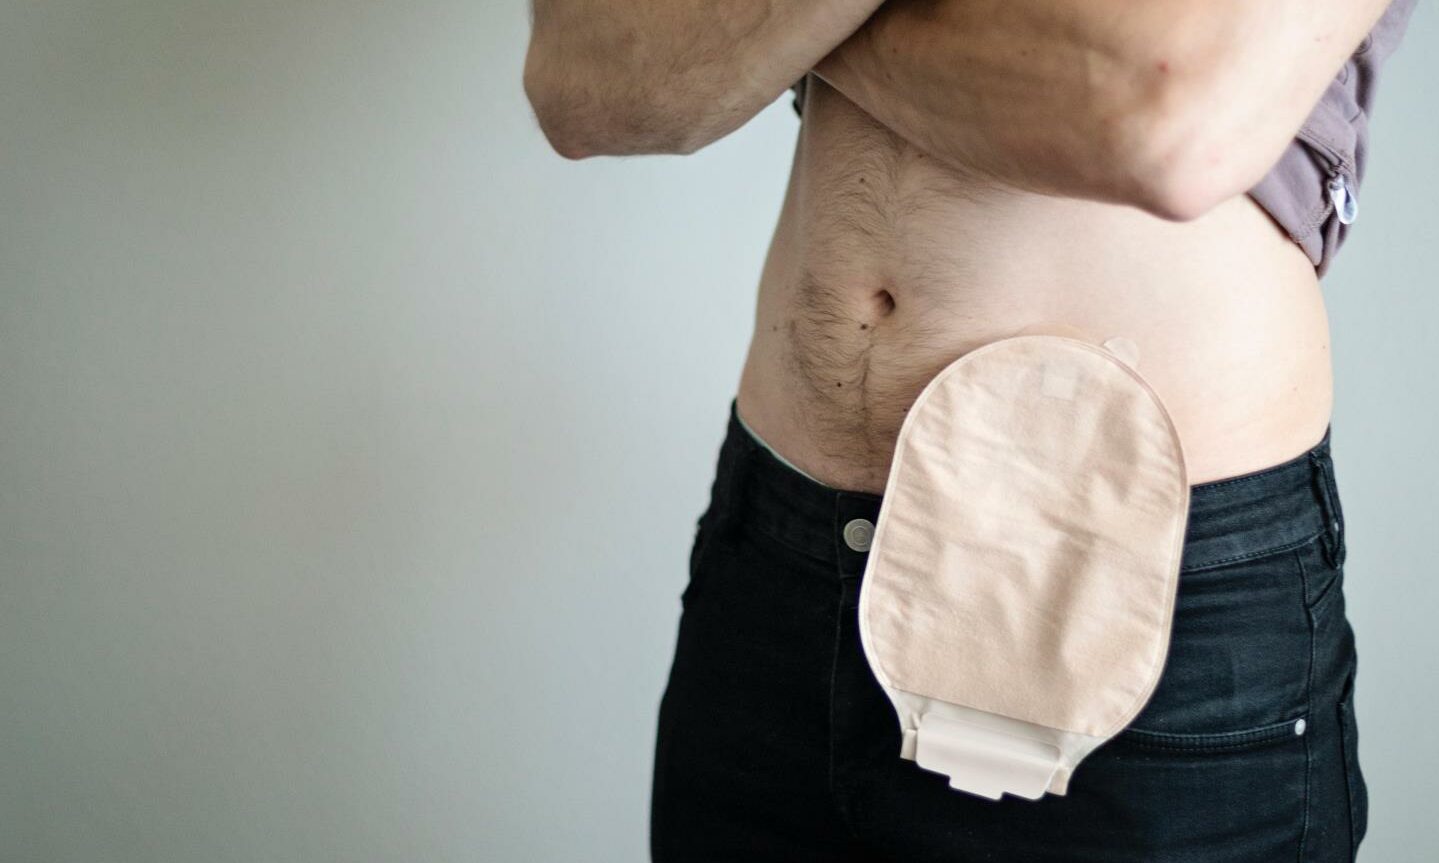 Some people with IBD may require surgery and a stoma bag.